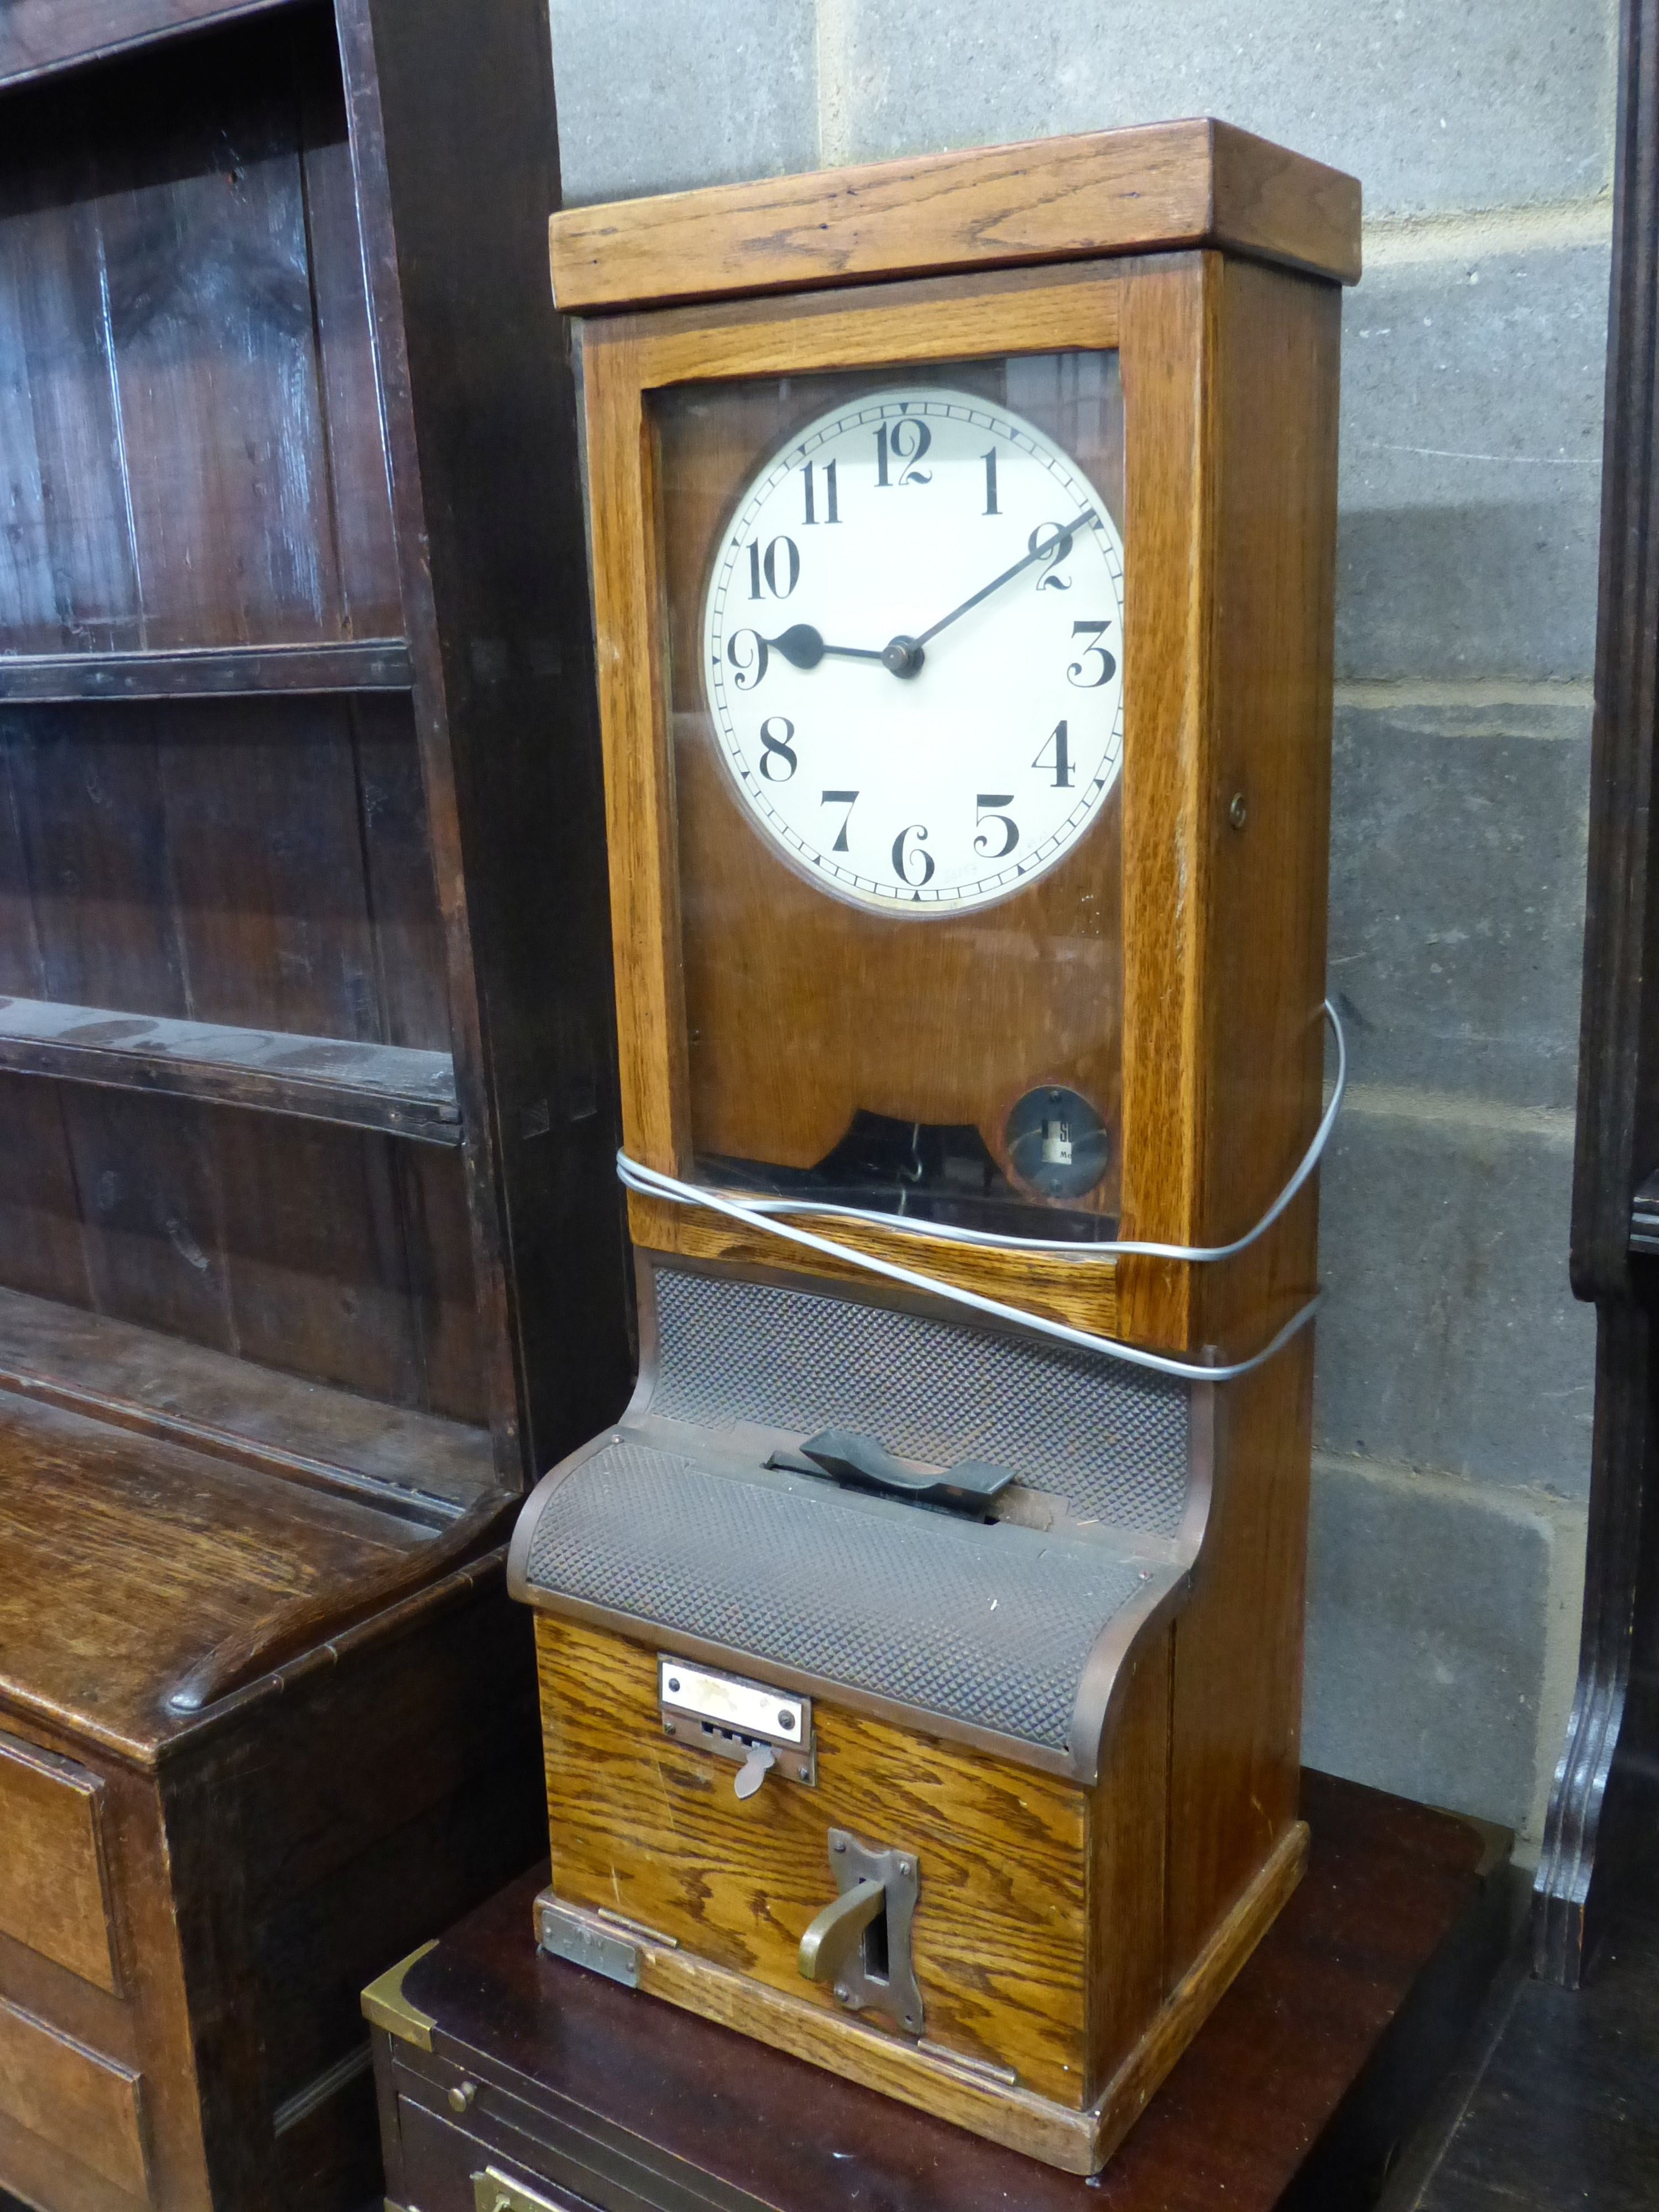 A vintage oak-cased electric wall factory time recorder clock, circa 1930